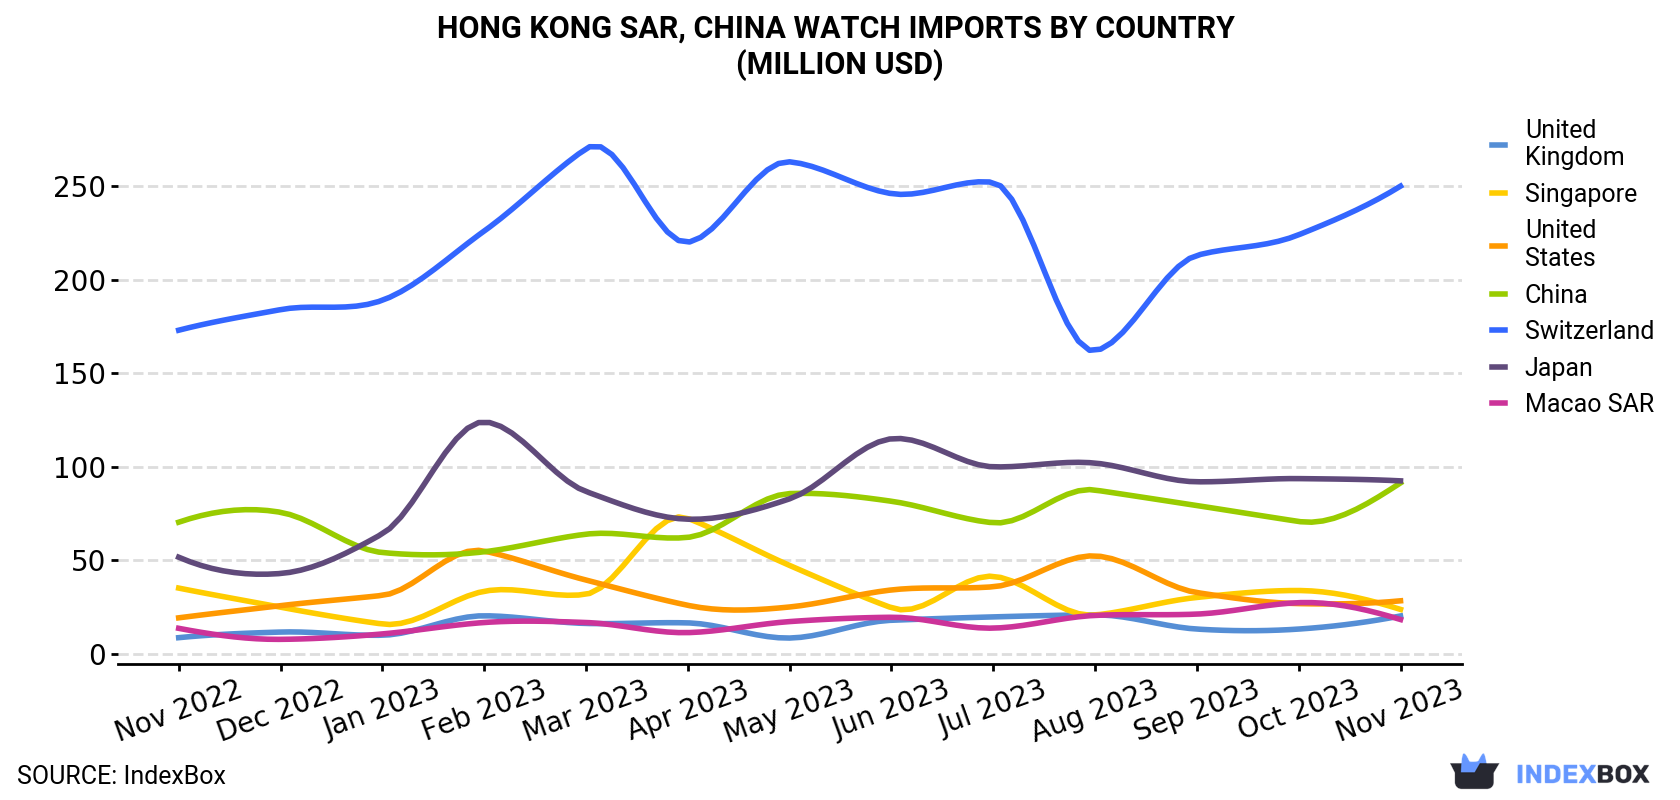 Hong Kong Watch Imports By Country (Million USD)